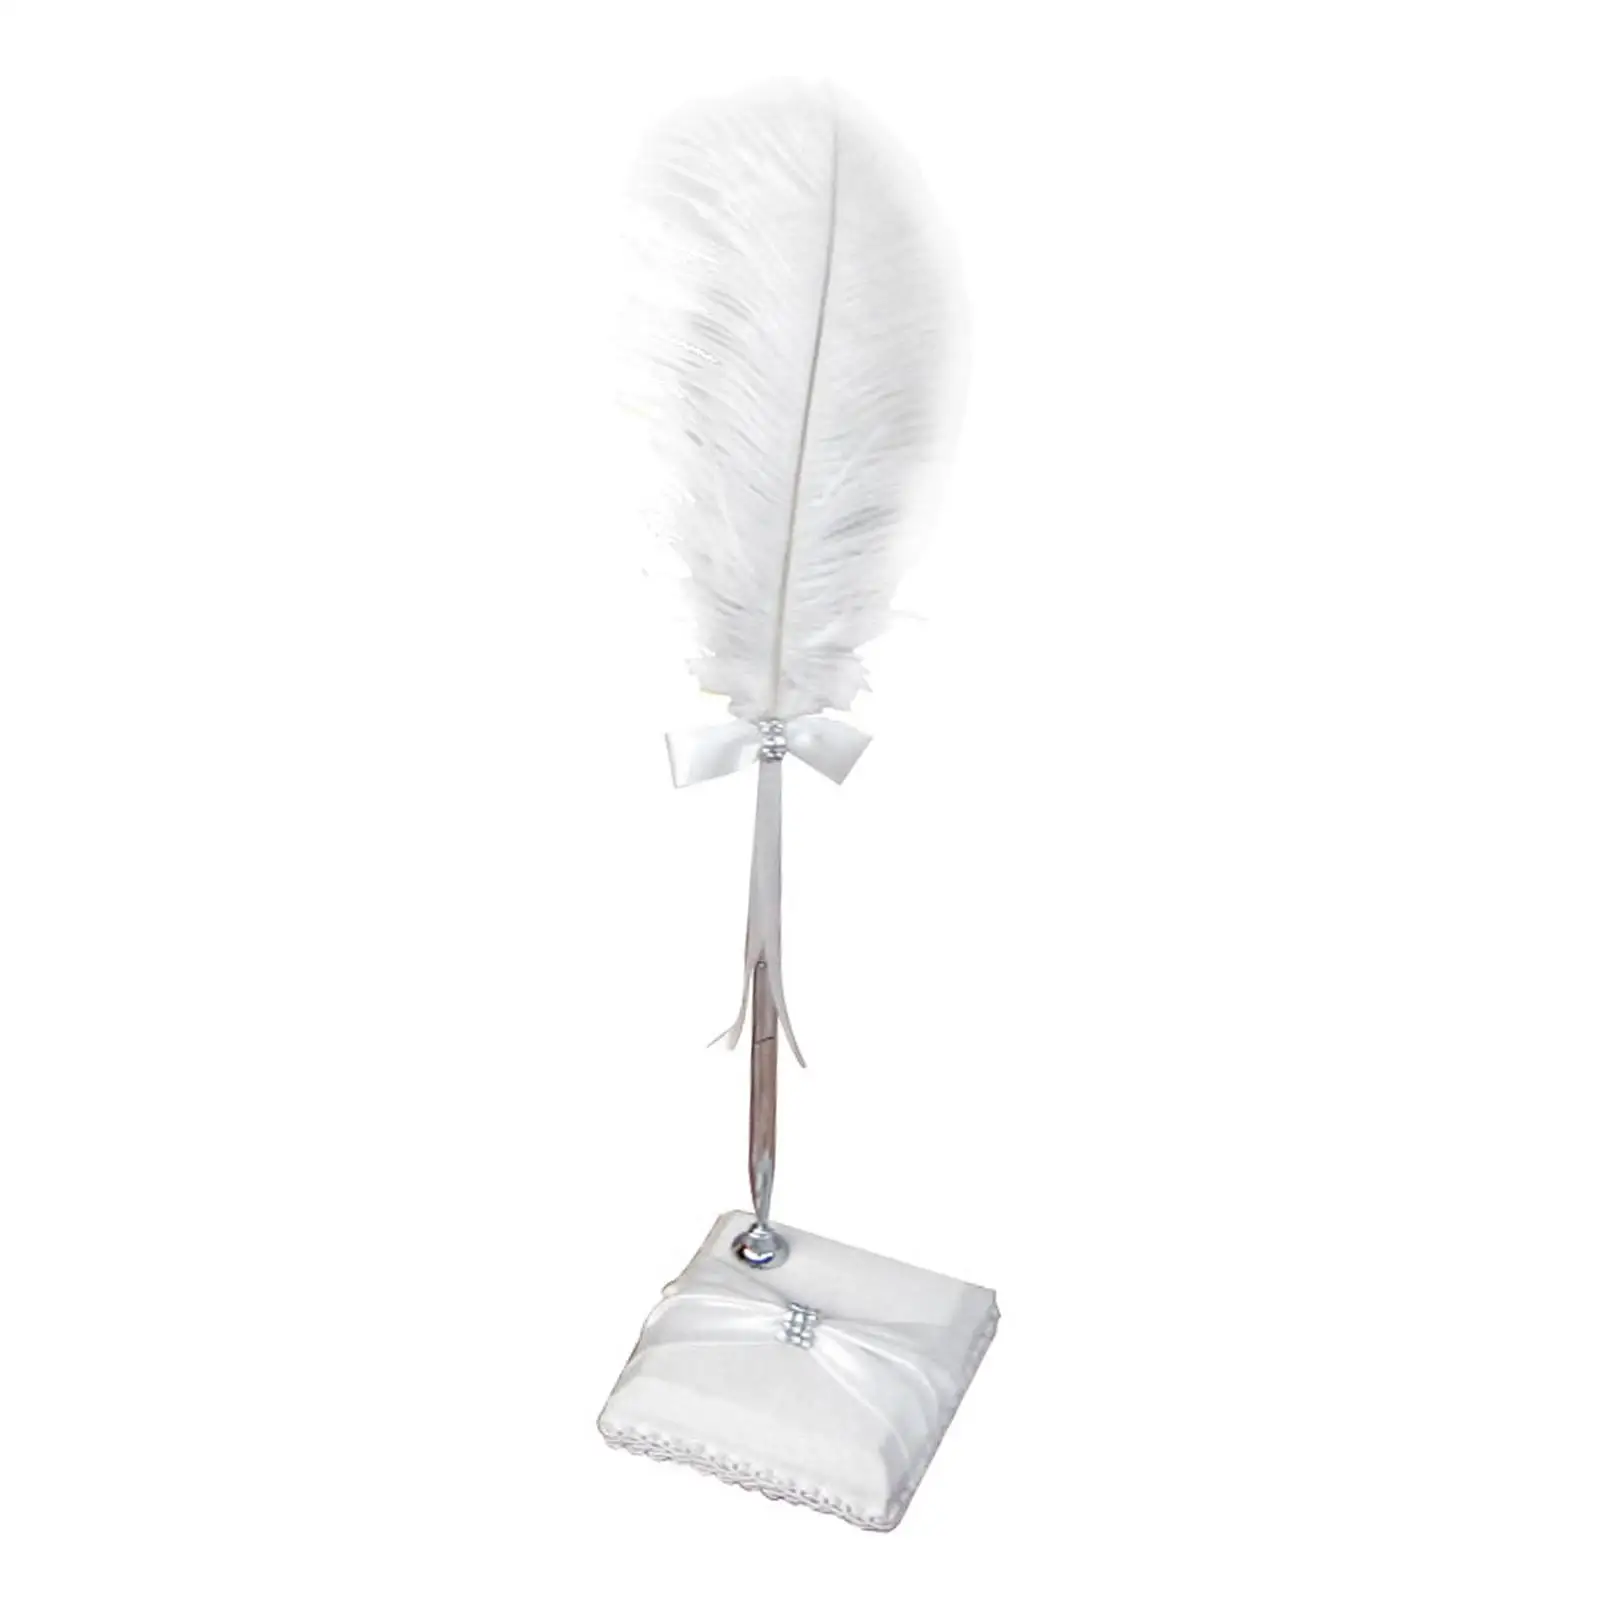 Guest Book Signing Pen Feather Decoration with Stand Vintage Wedding Pen for Office Gift Wedding Table Decor Bridal